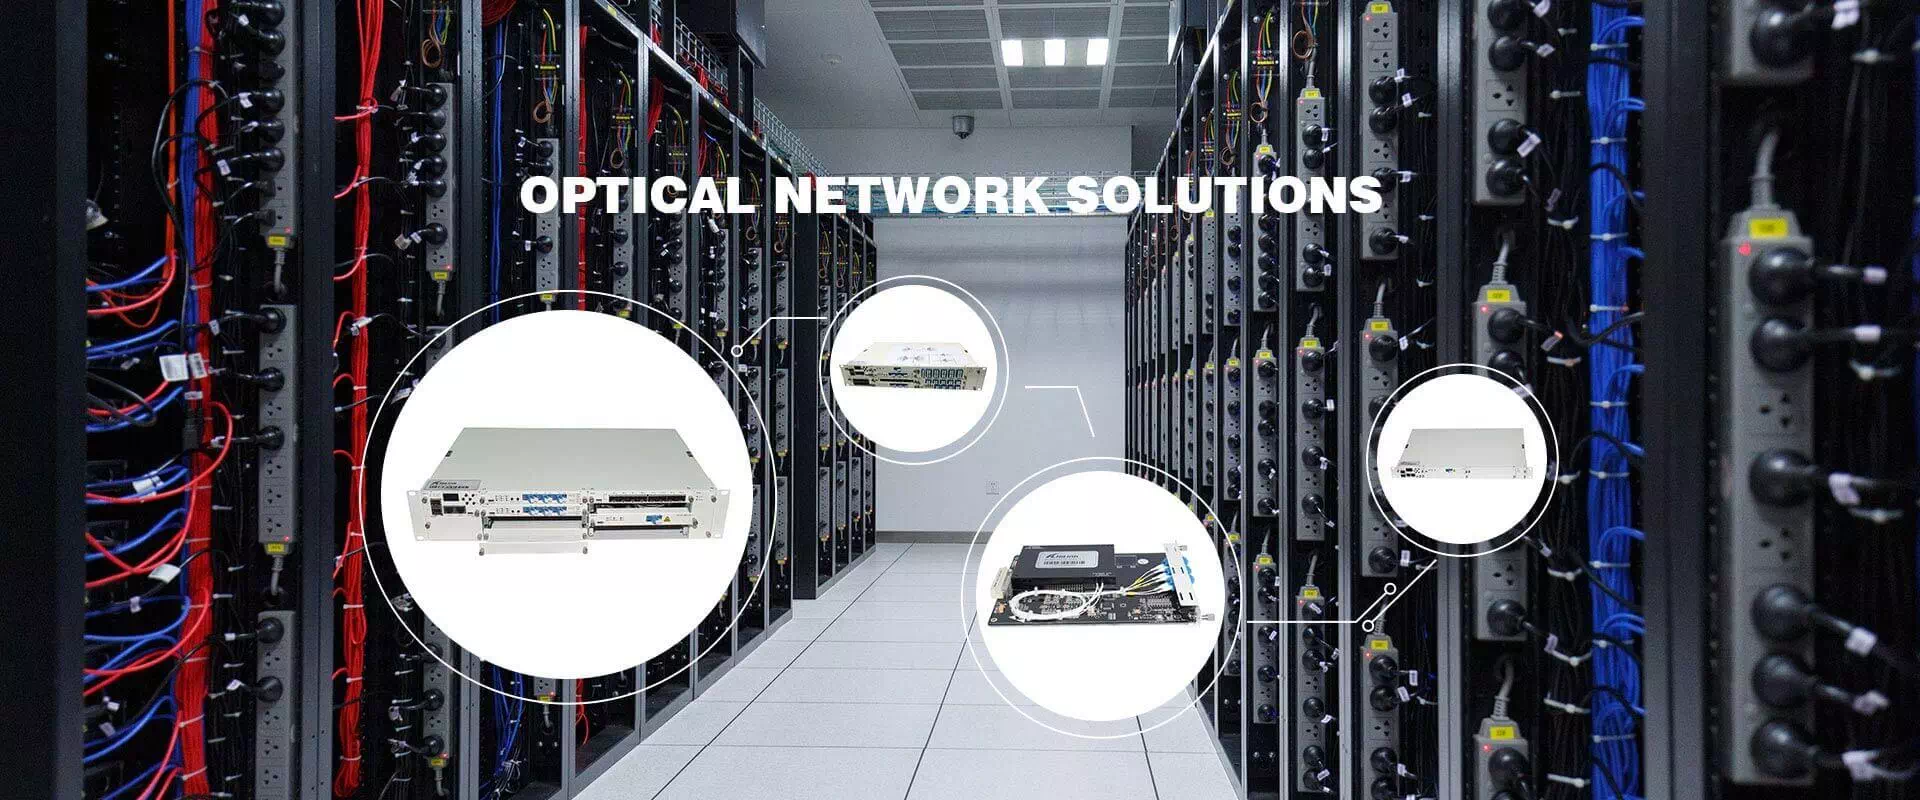 Optical Network Solutions